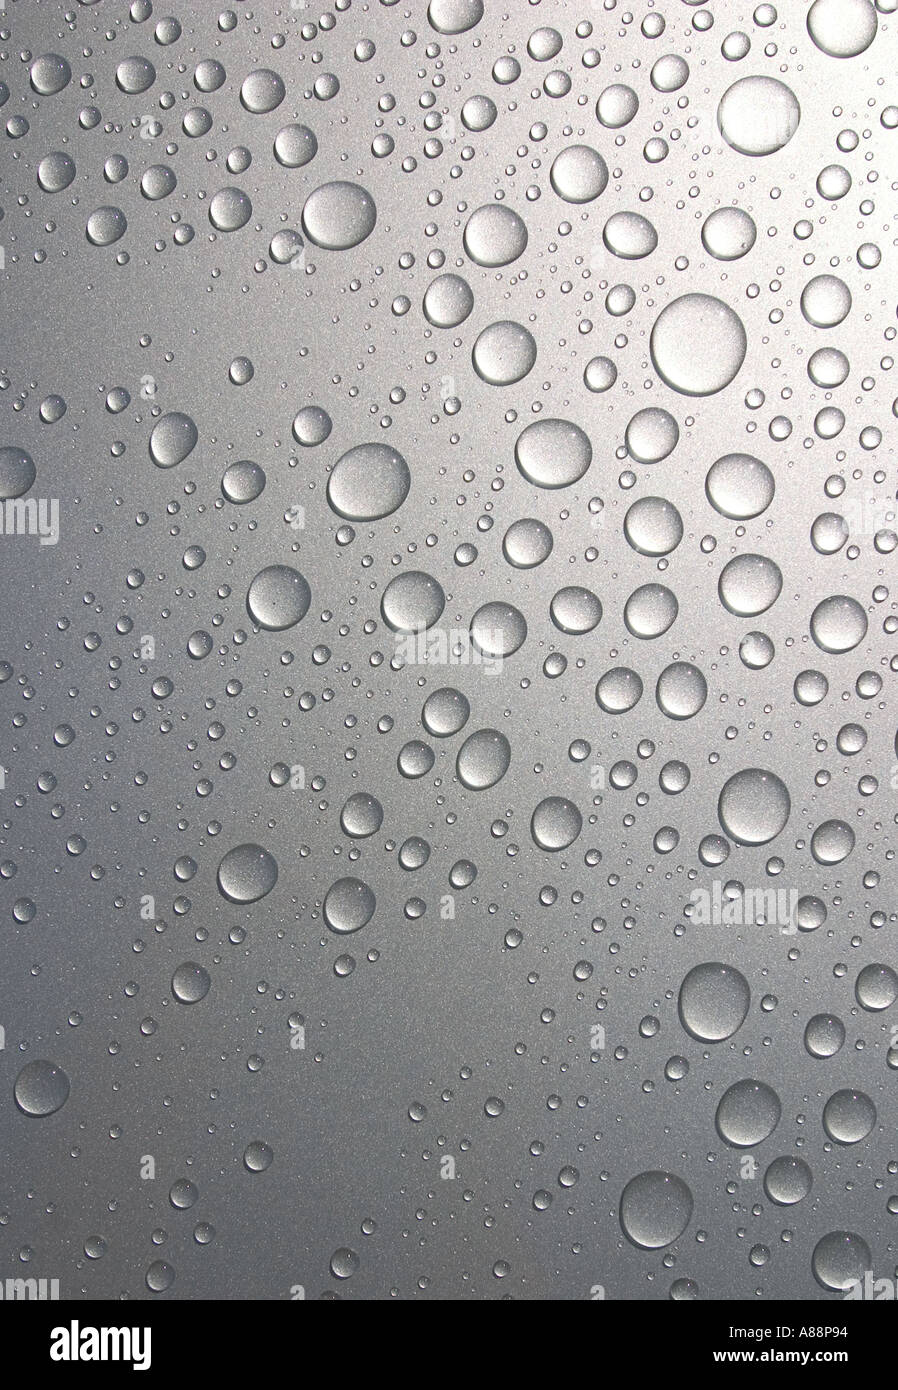 Round water drops on metal surface Stock Photo